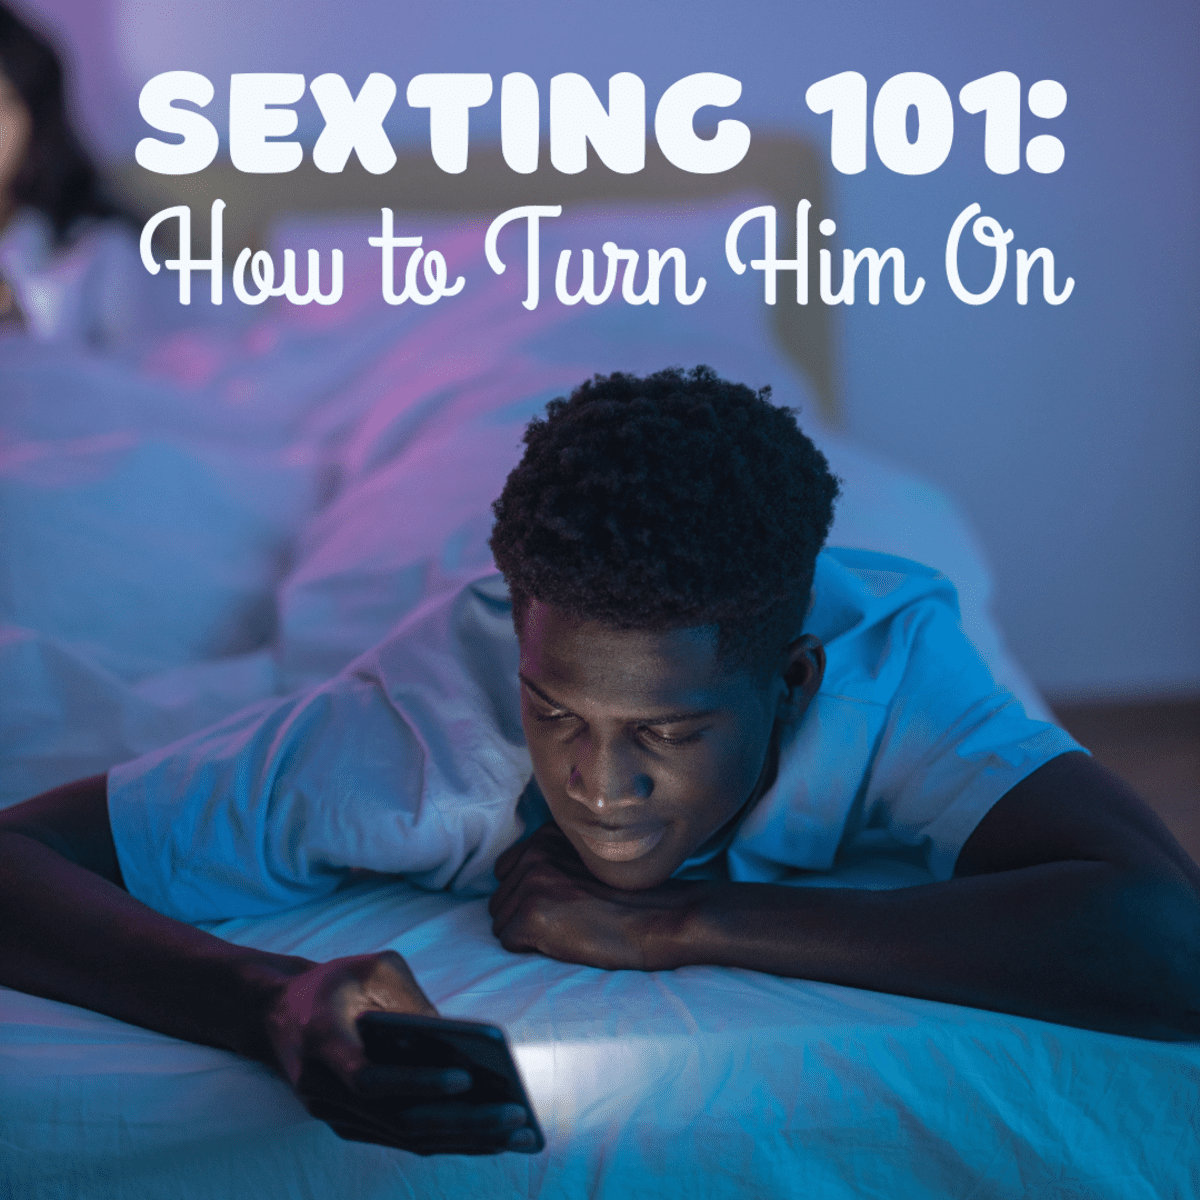 Why men like sexting